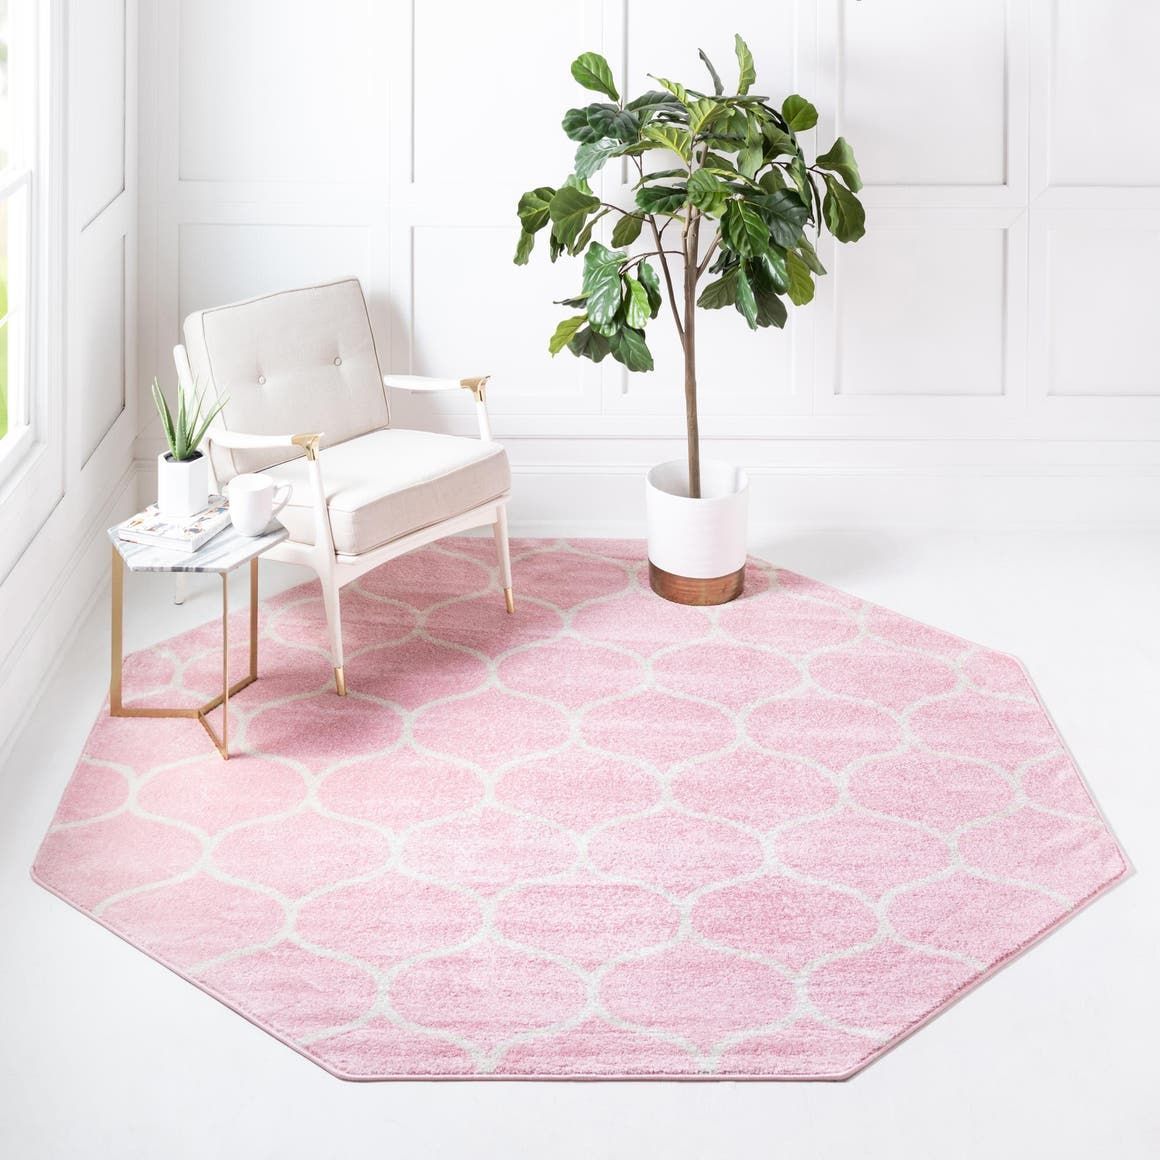 Light Pink 5' X 5' Lattice Frieze Octagon Rug | Octagon Rugs, Modern Area  Rugs, Pink Area Rug Pertaining To Pink Lattice Frieze Rugs (View 4 of 15)